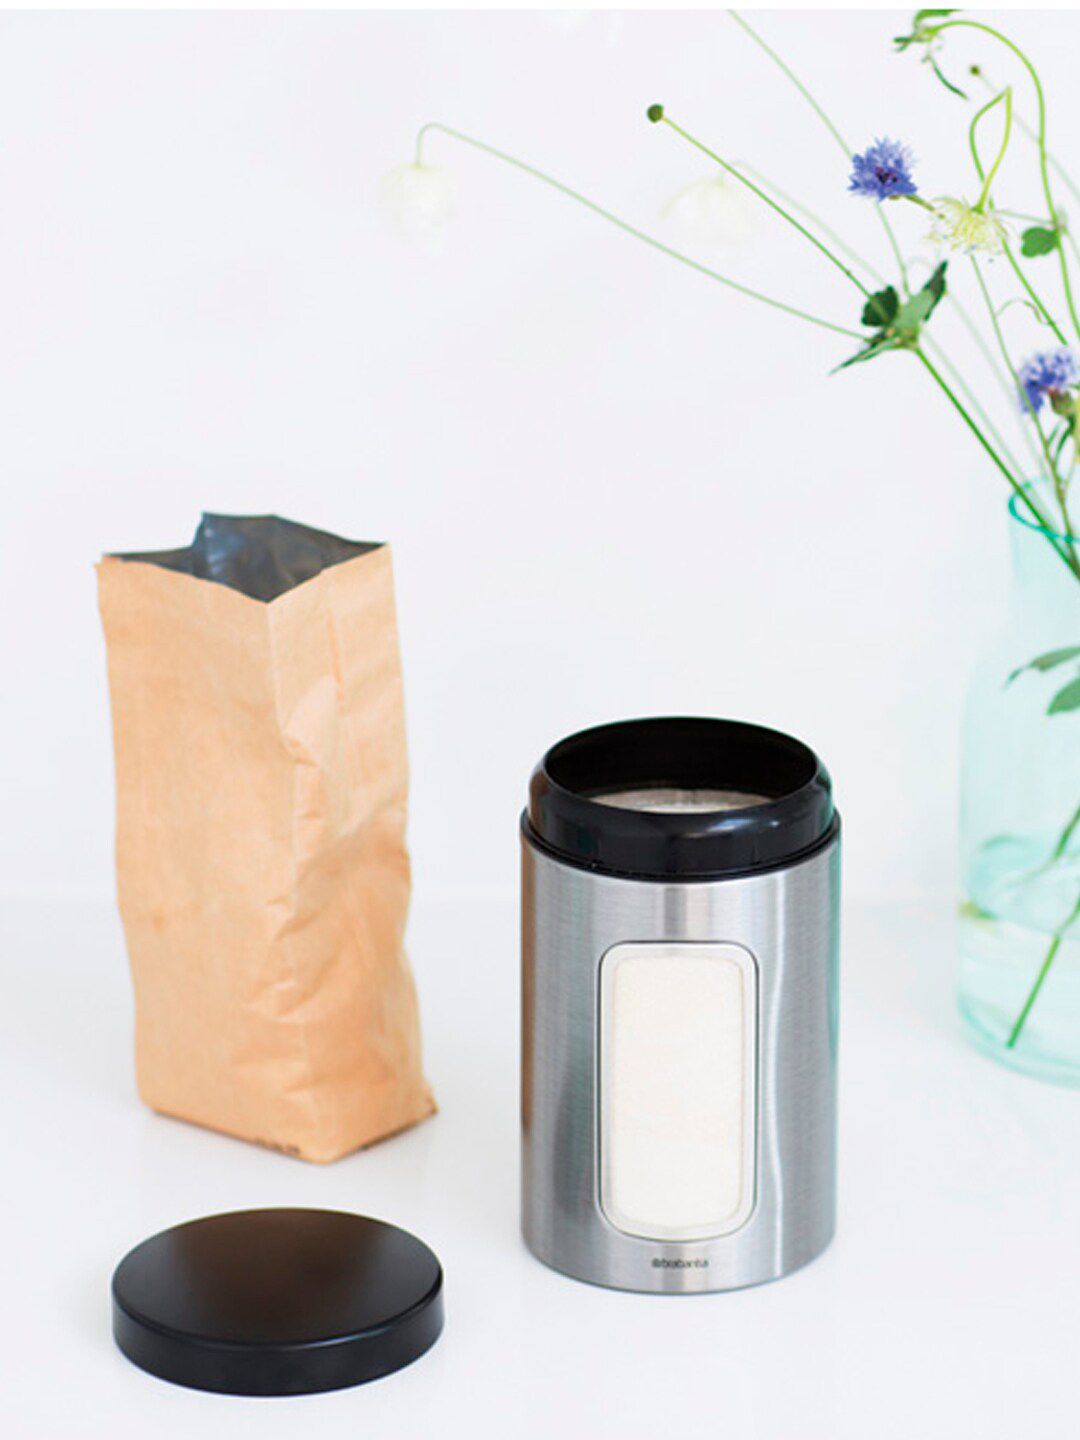 Brabantia Silver-Toned Window Canister 1.4 litre Price in India